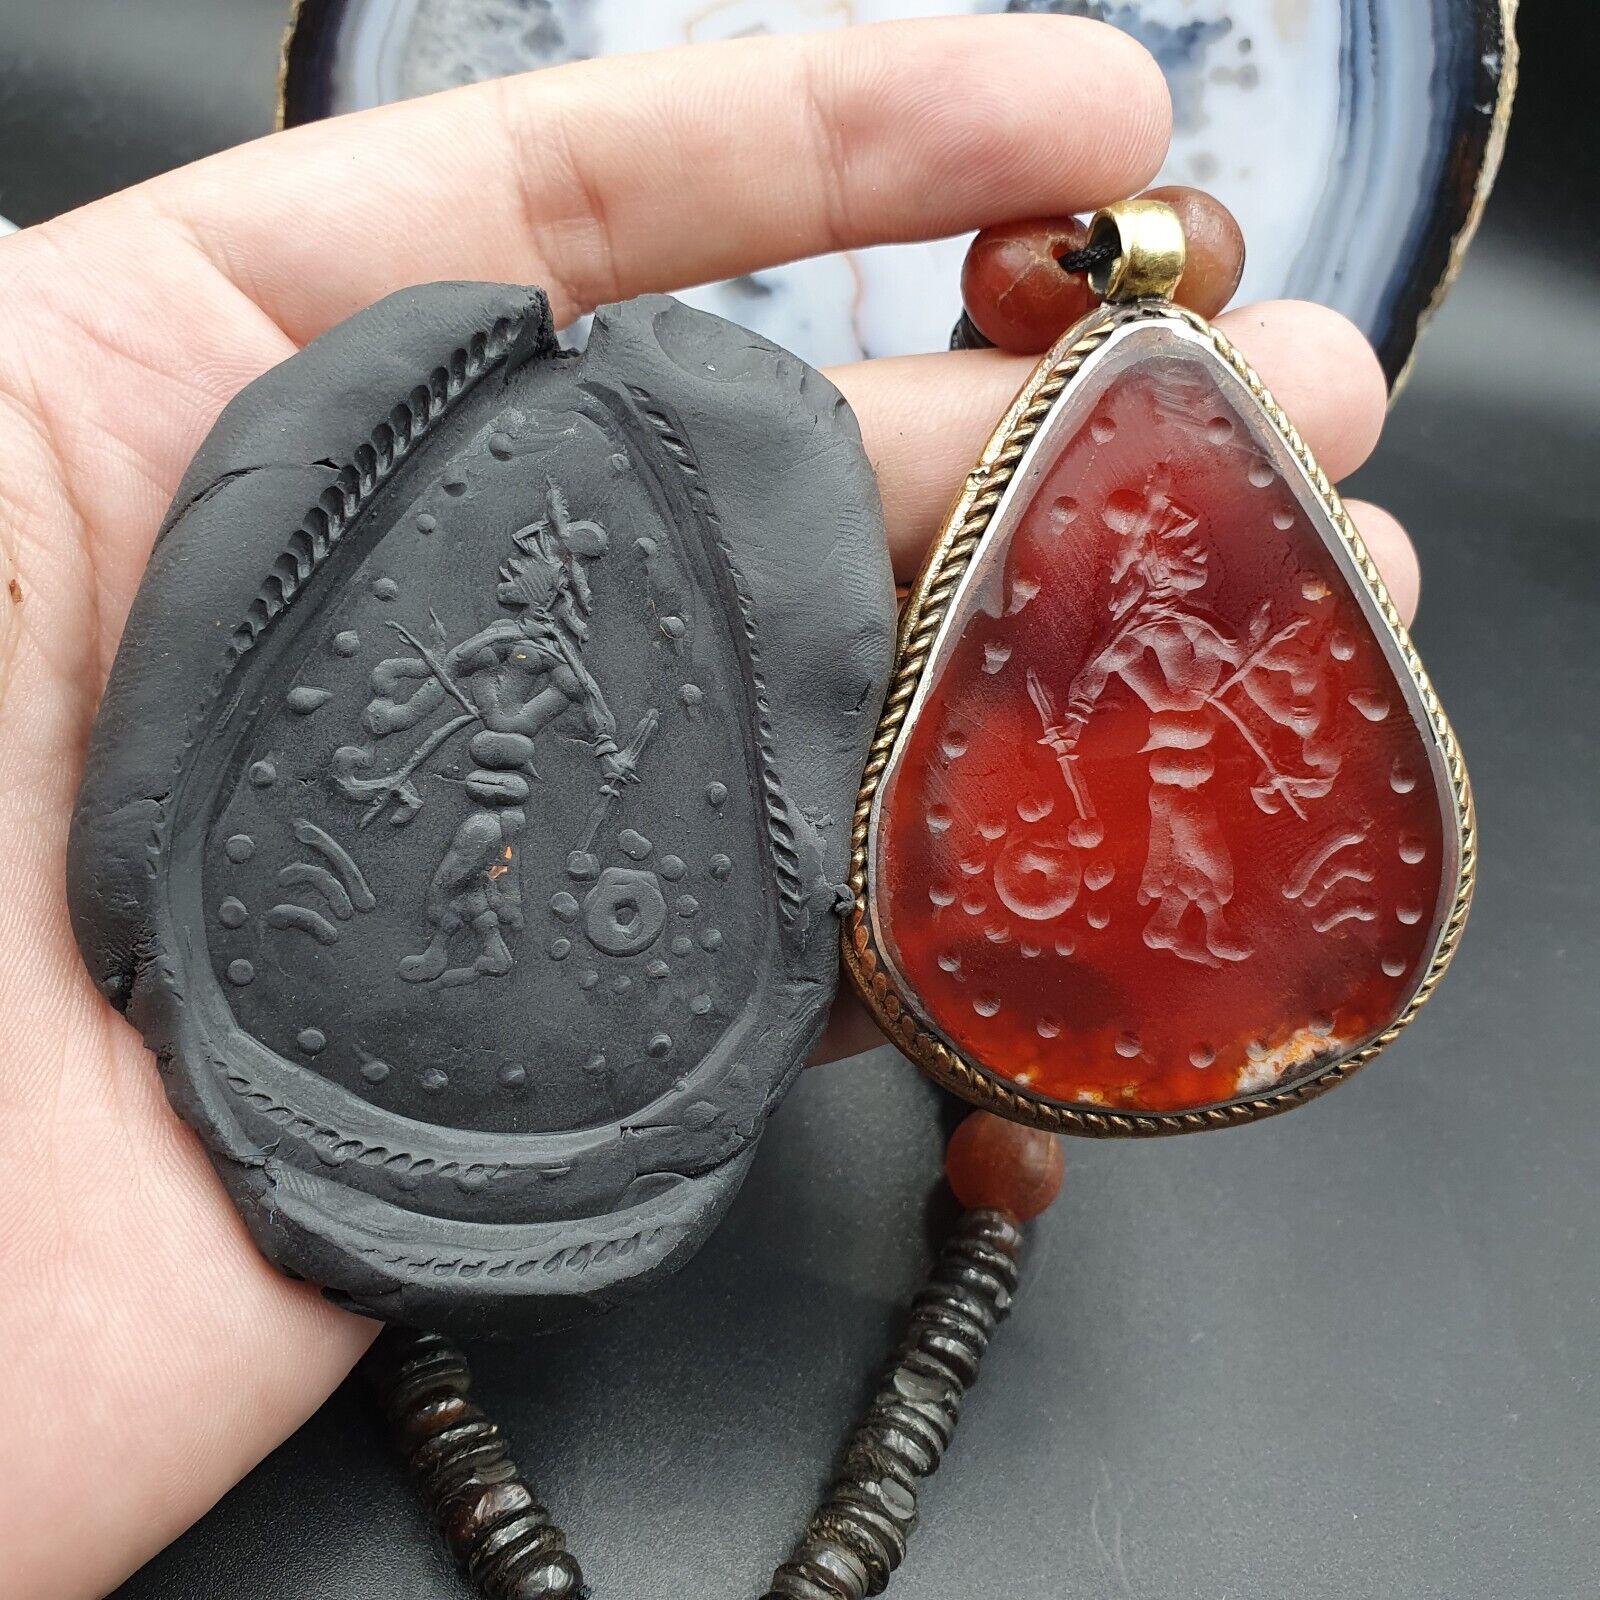 Antique Wonderful Carving Agate pendent Carved Rare Seal necklace